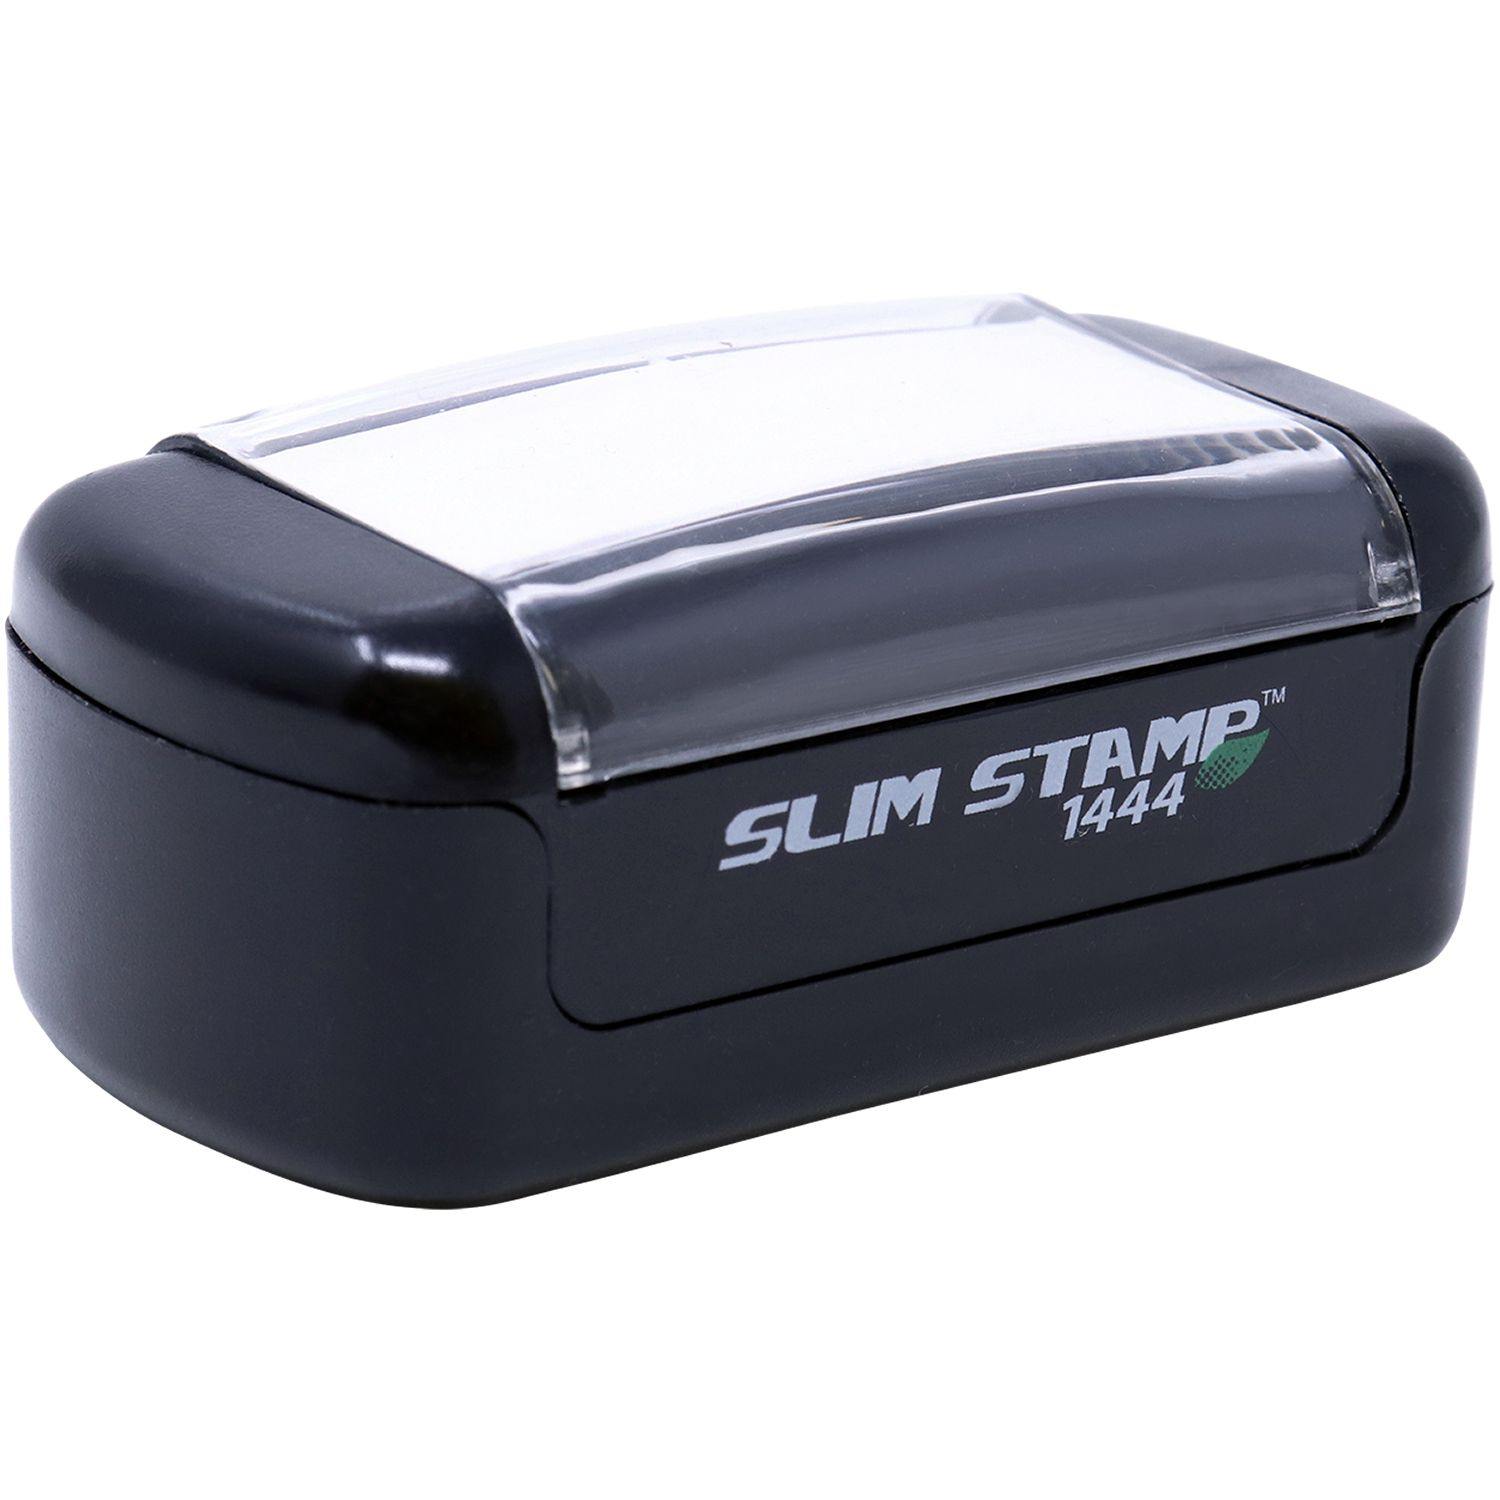 Slim Pre Inked Book Stamp - Engineer Seal Stamps - Brand_Slim, Impression Size_Small, Stamp Type_Pre-Inked Stamp, Type of Use_Teacher